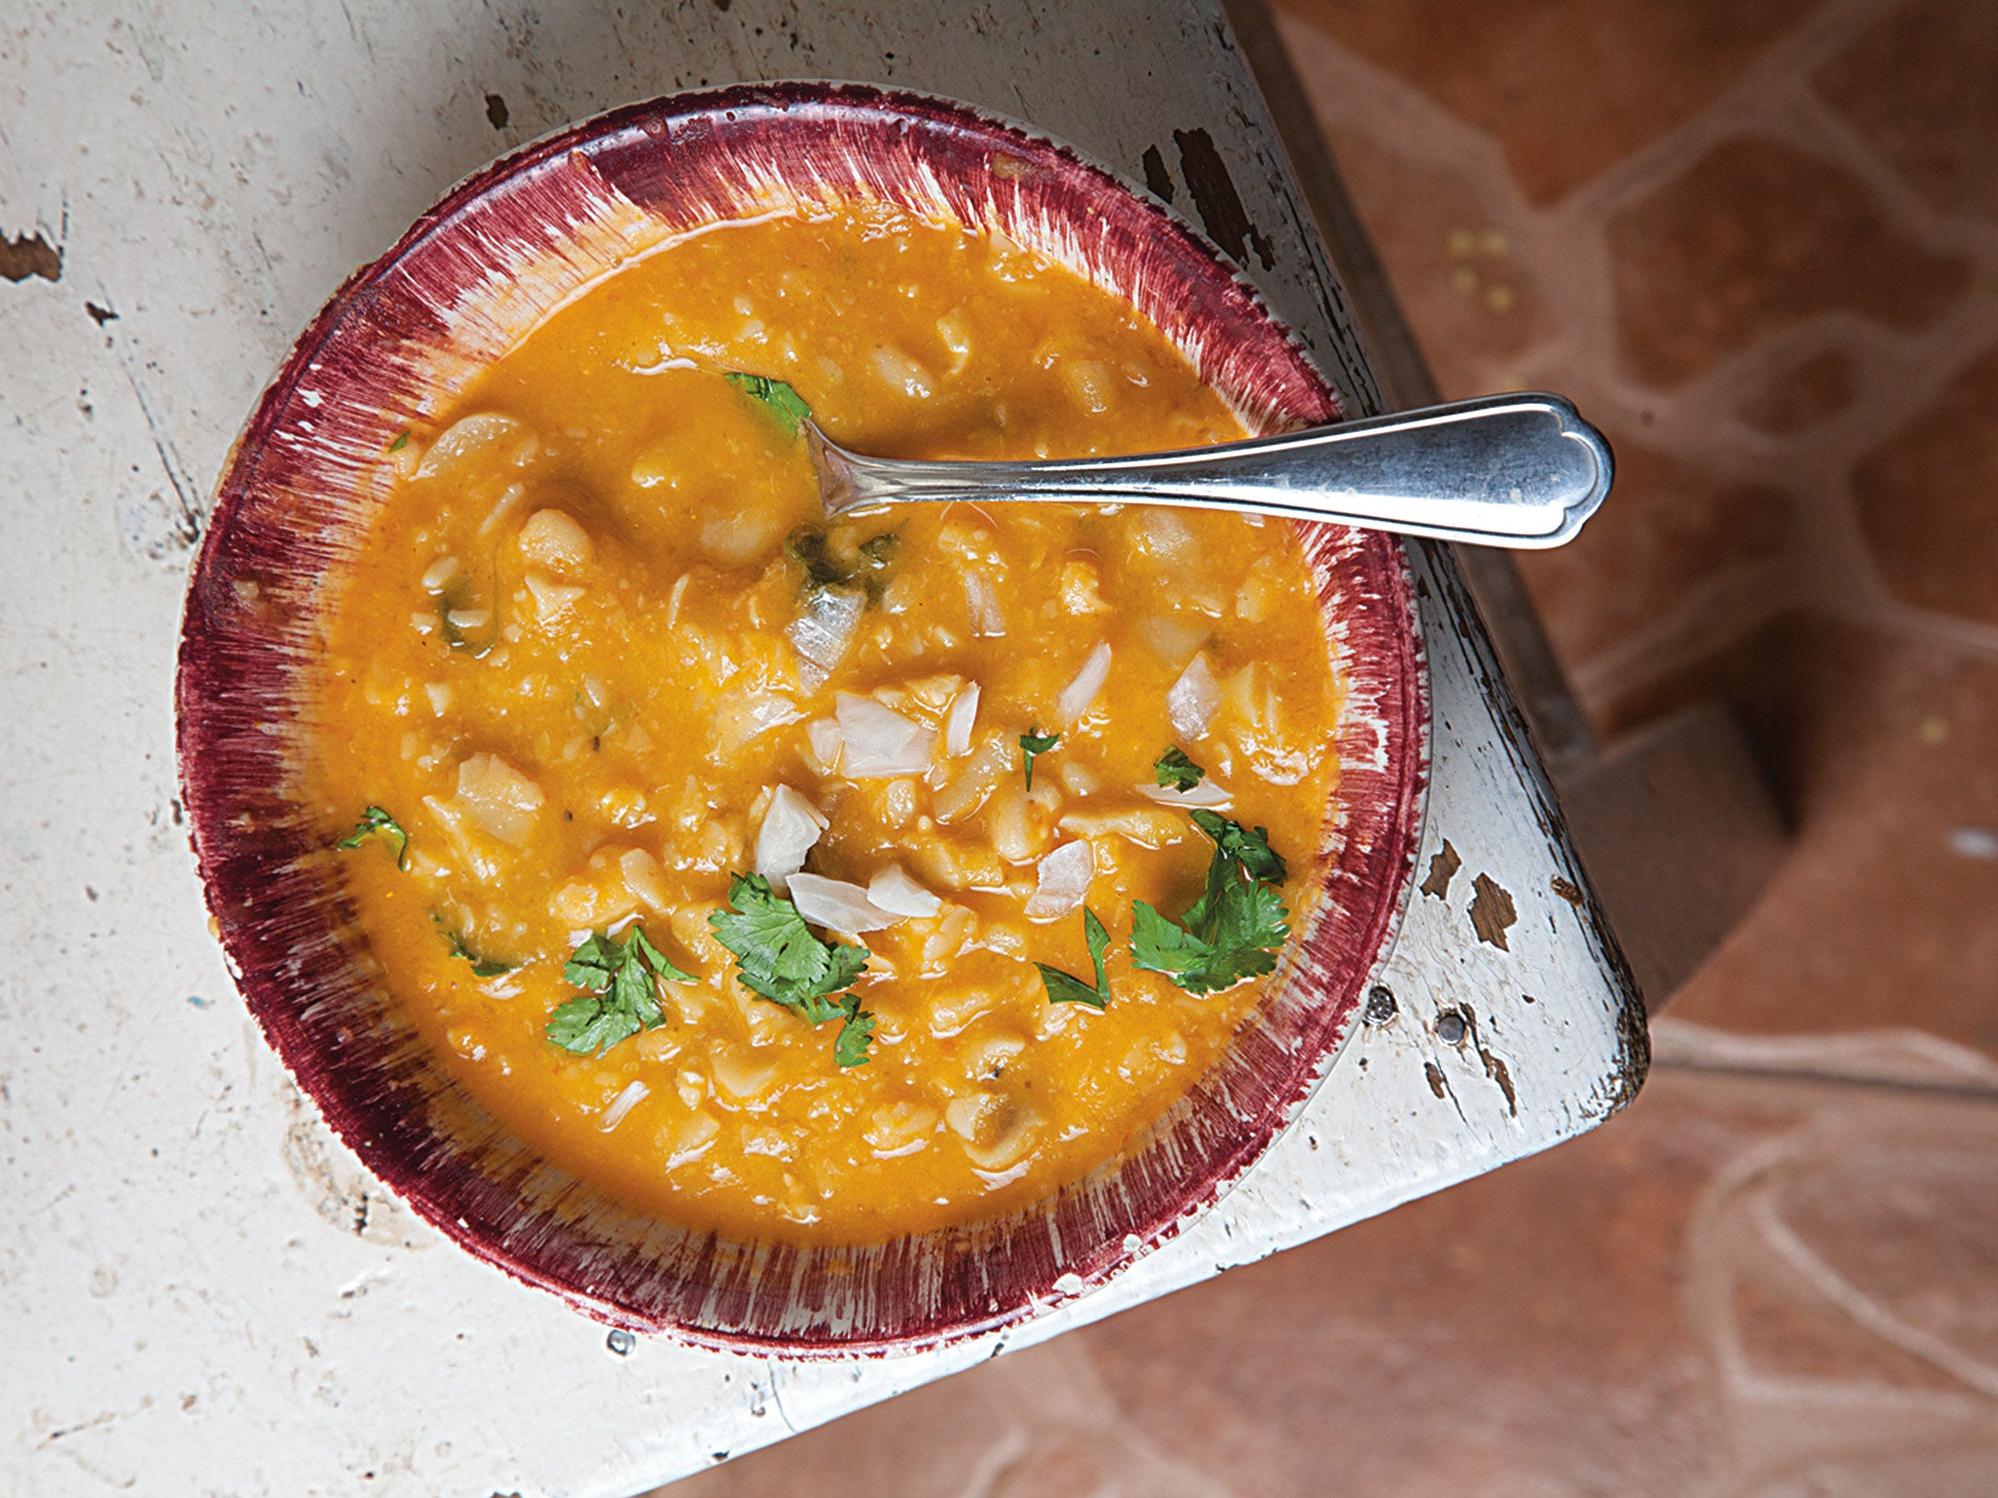  Warm up your soul with a bowl of hearty Sopa De Habas!